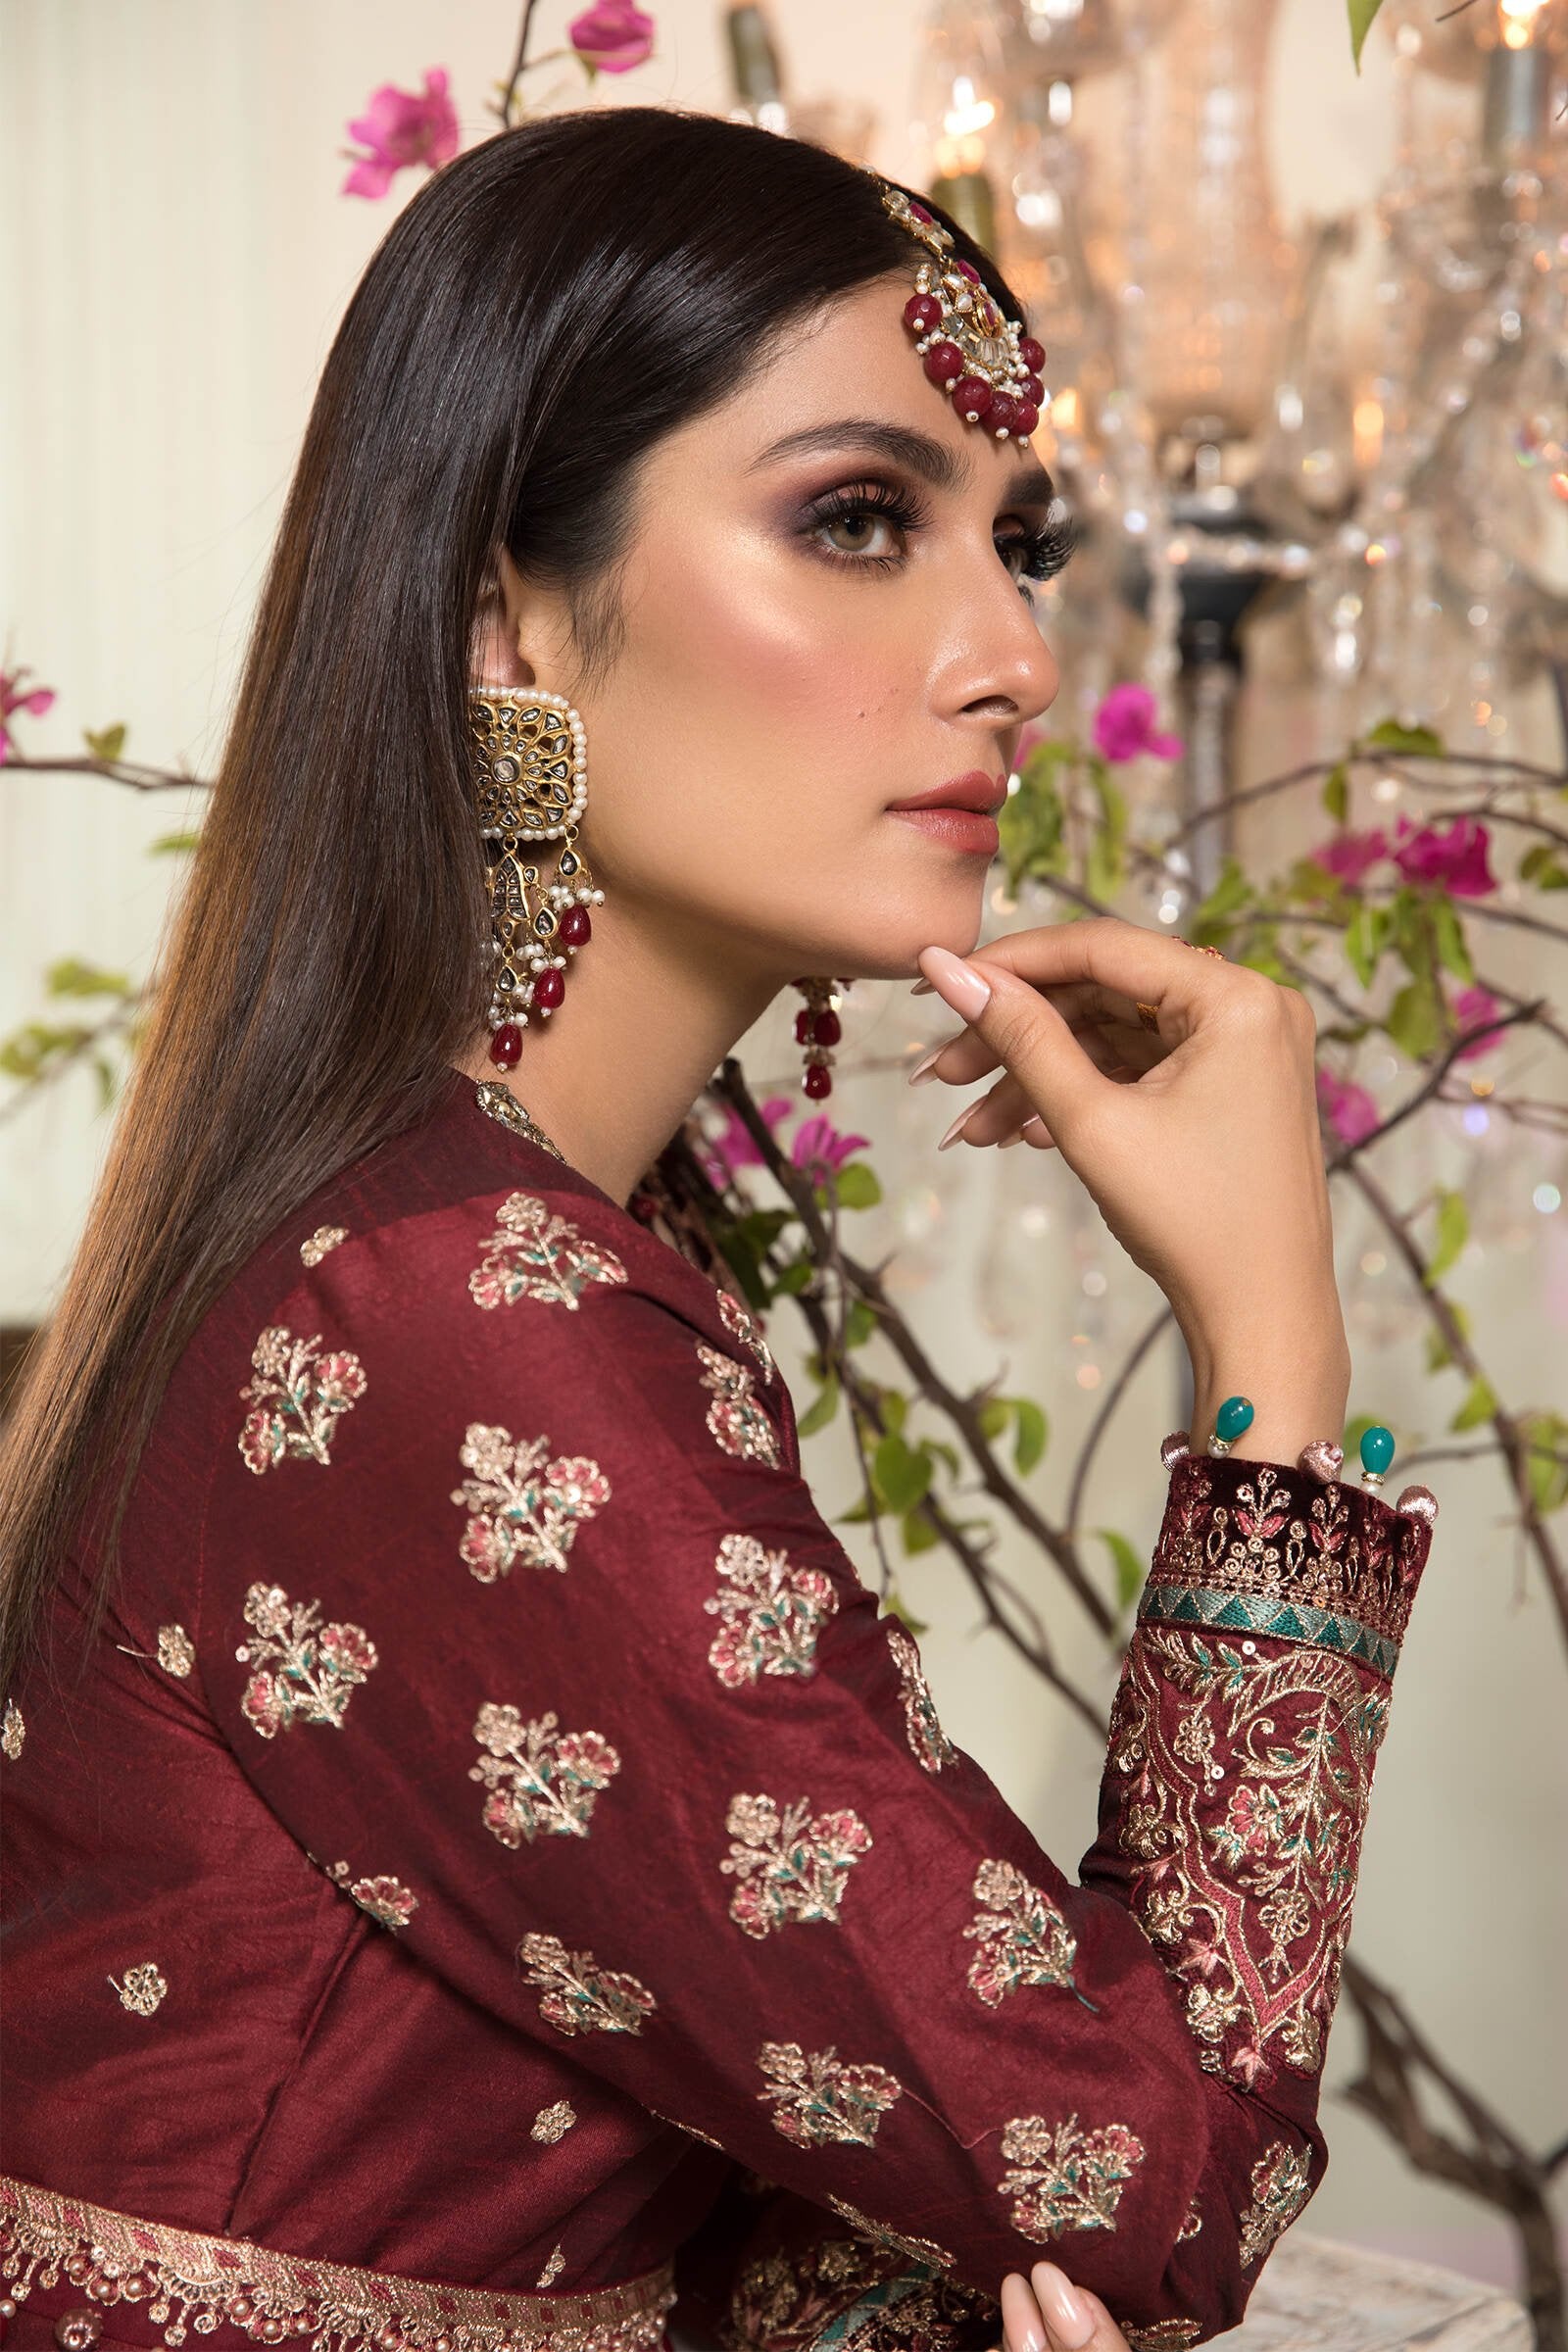 Unstitched MBROIDERED - Maroon and Salmon pink (BD-2204) - Heer Rang